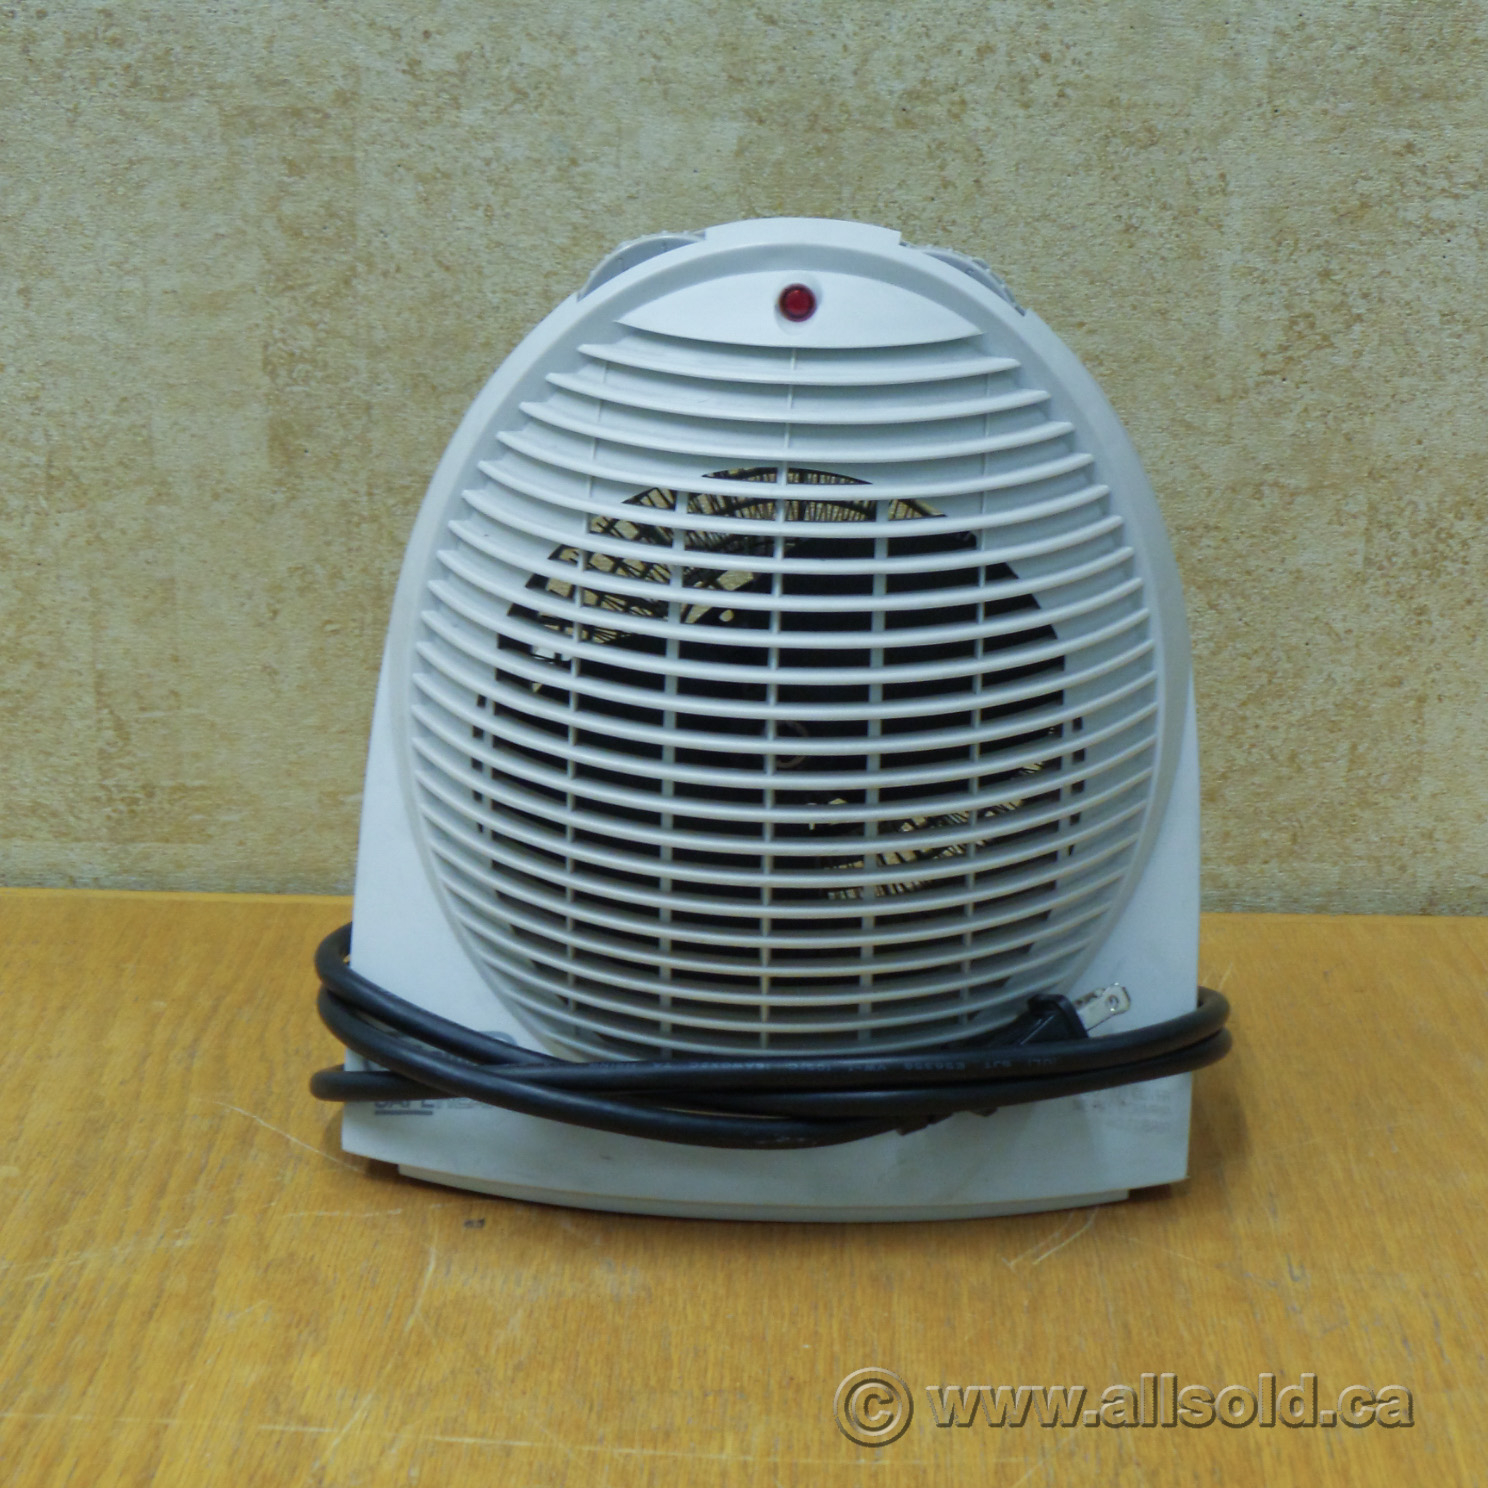 Delonghi Dfh132 Safeheat White Space Heater Allsoldca intended for proportions 1488 X 1488